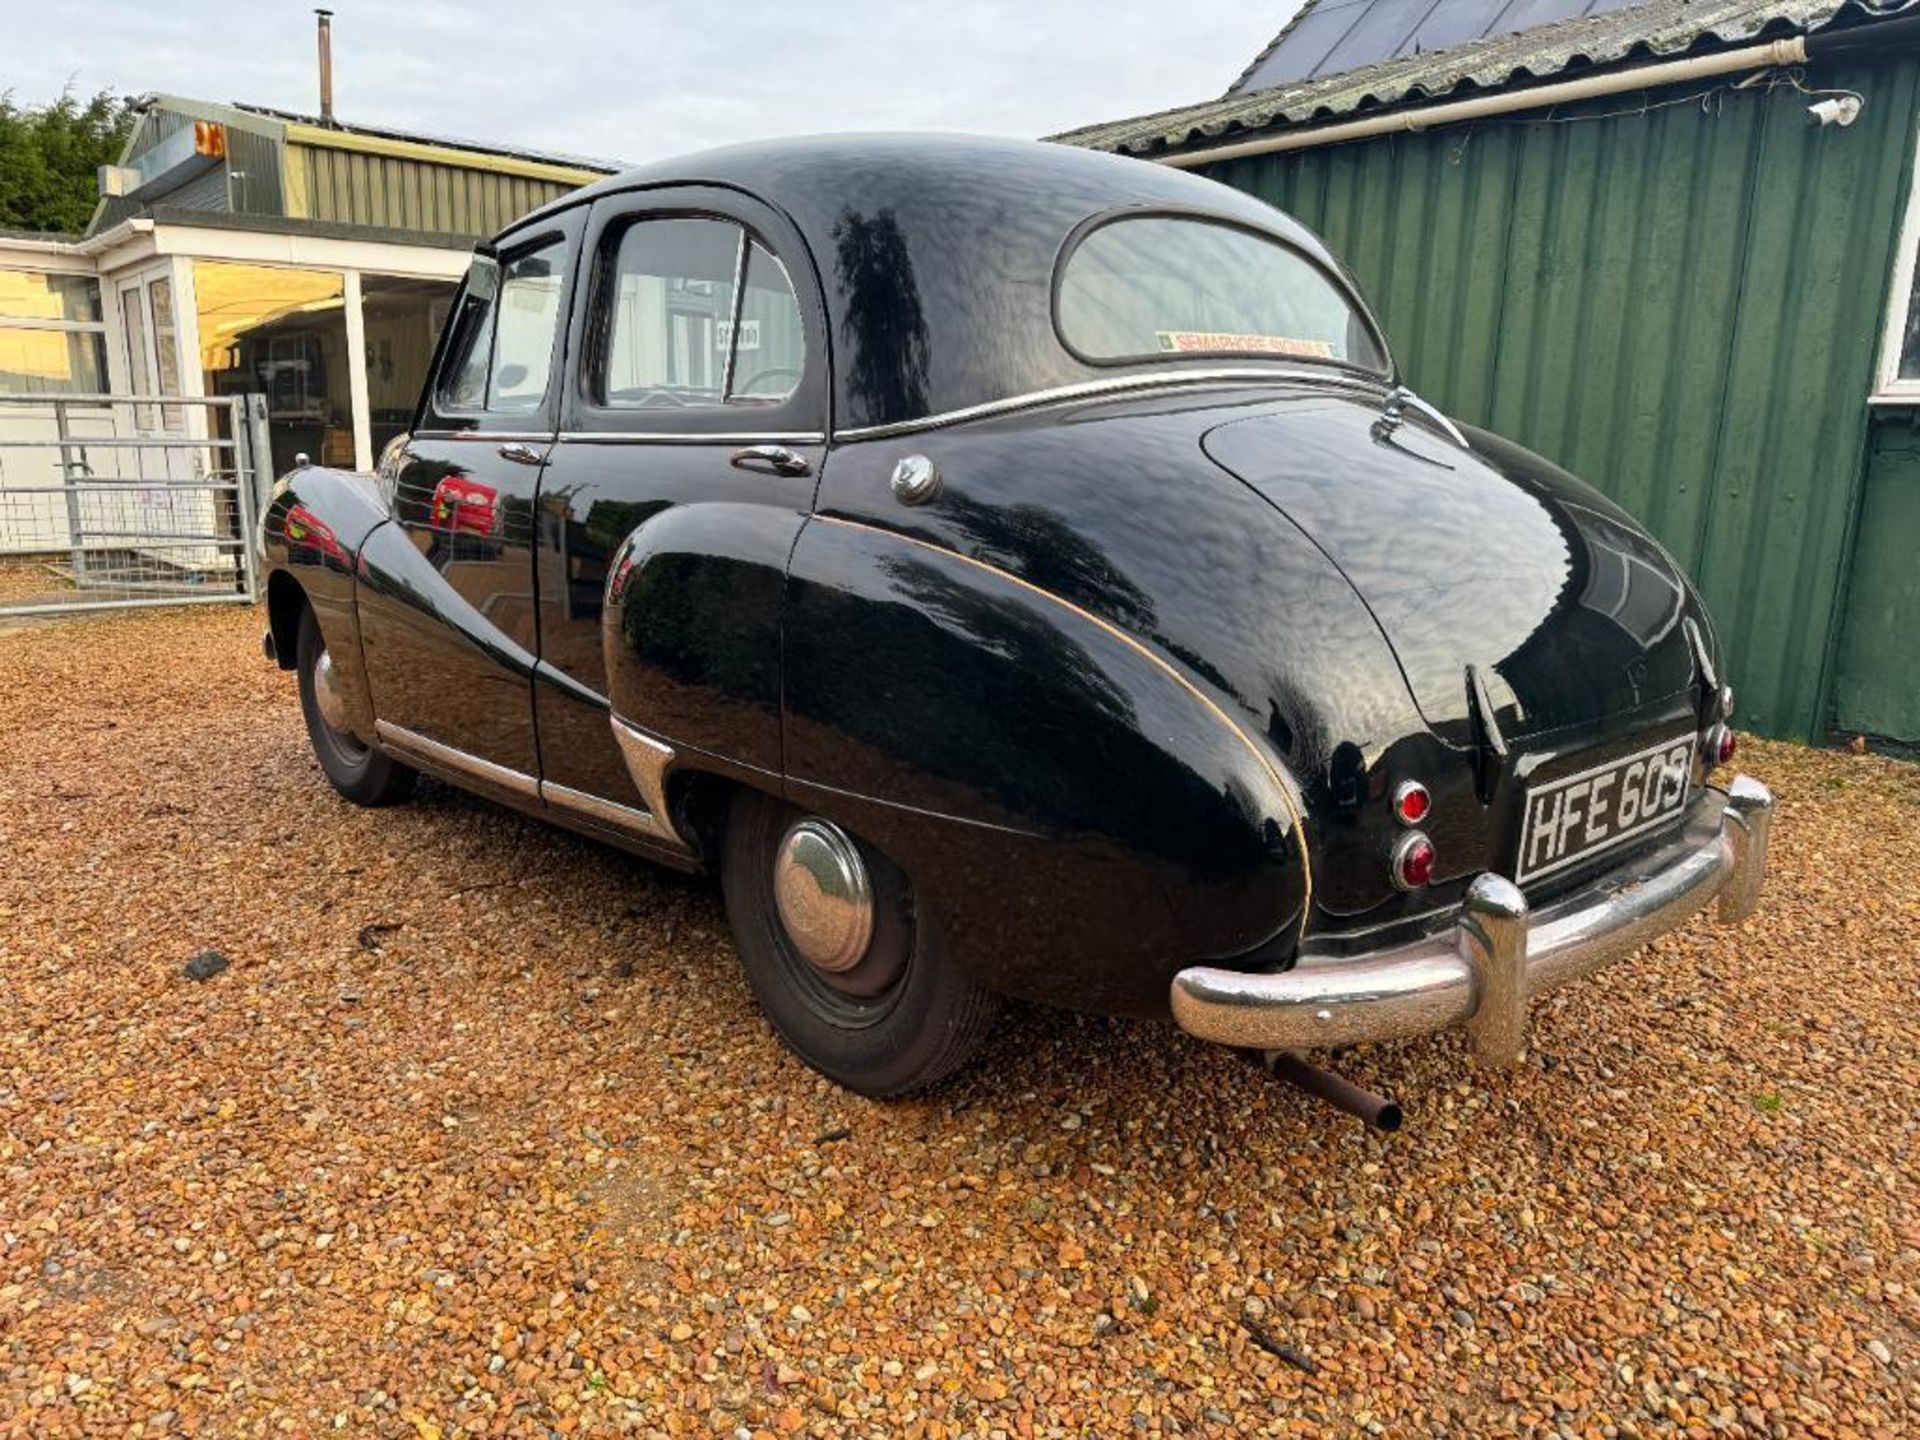 1954 Austin A40 Somerset black saloon car with 1200cc petrol engine, red leather interior and spare - Image 23 of 24